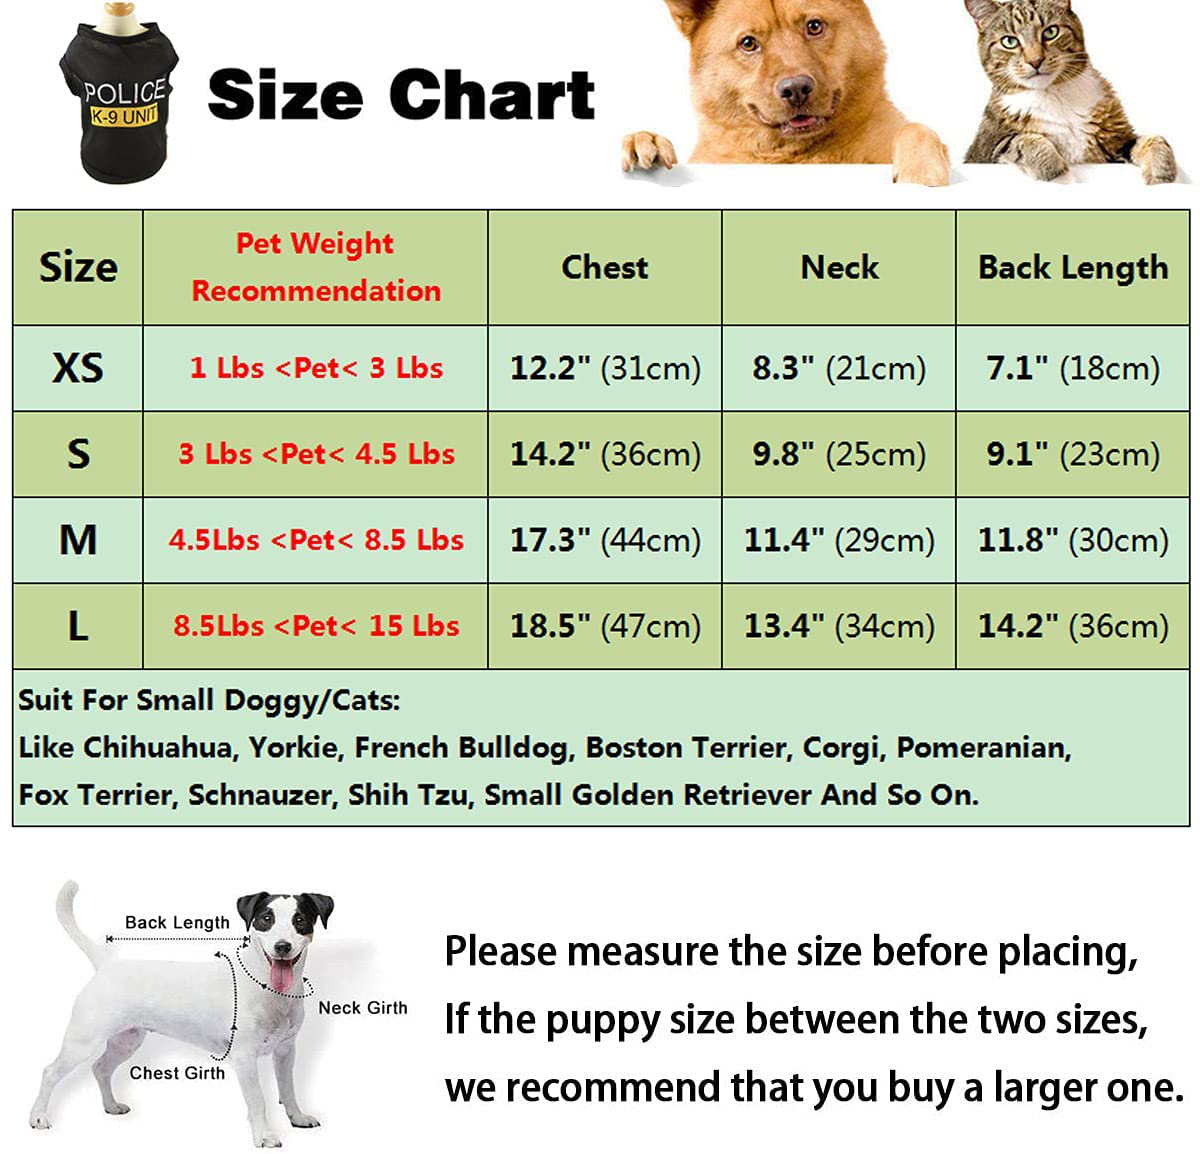 Dog T-Shirt Pet Police Dog Cat Clothes Summer Costumes Puppy Shirt, Breathable Outfits Vest Apparel for Extra Small Medium Doggy Boy and Girl